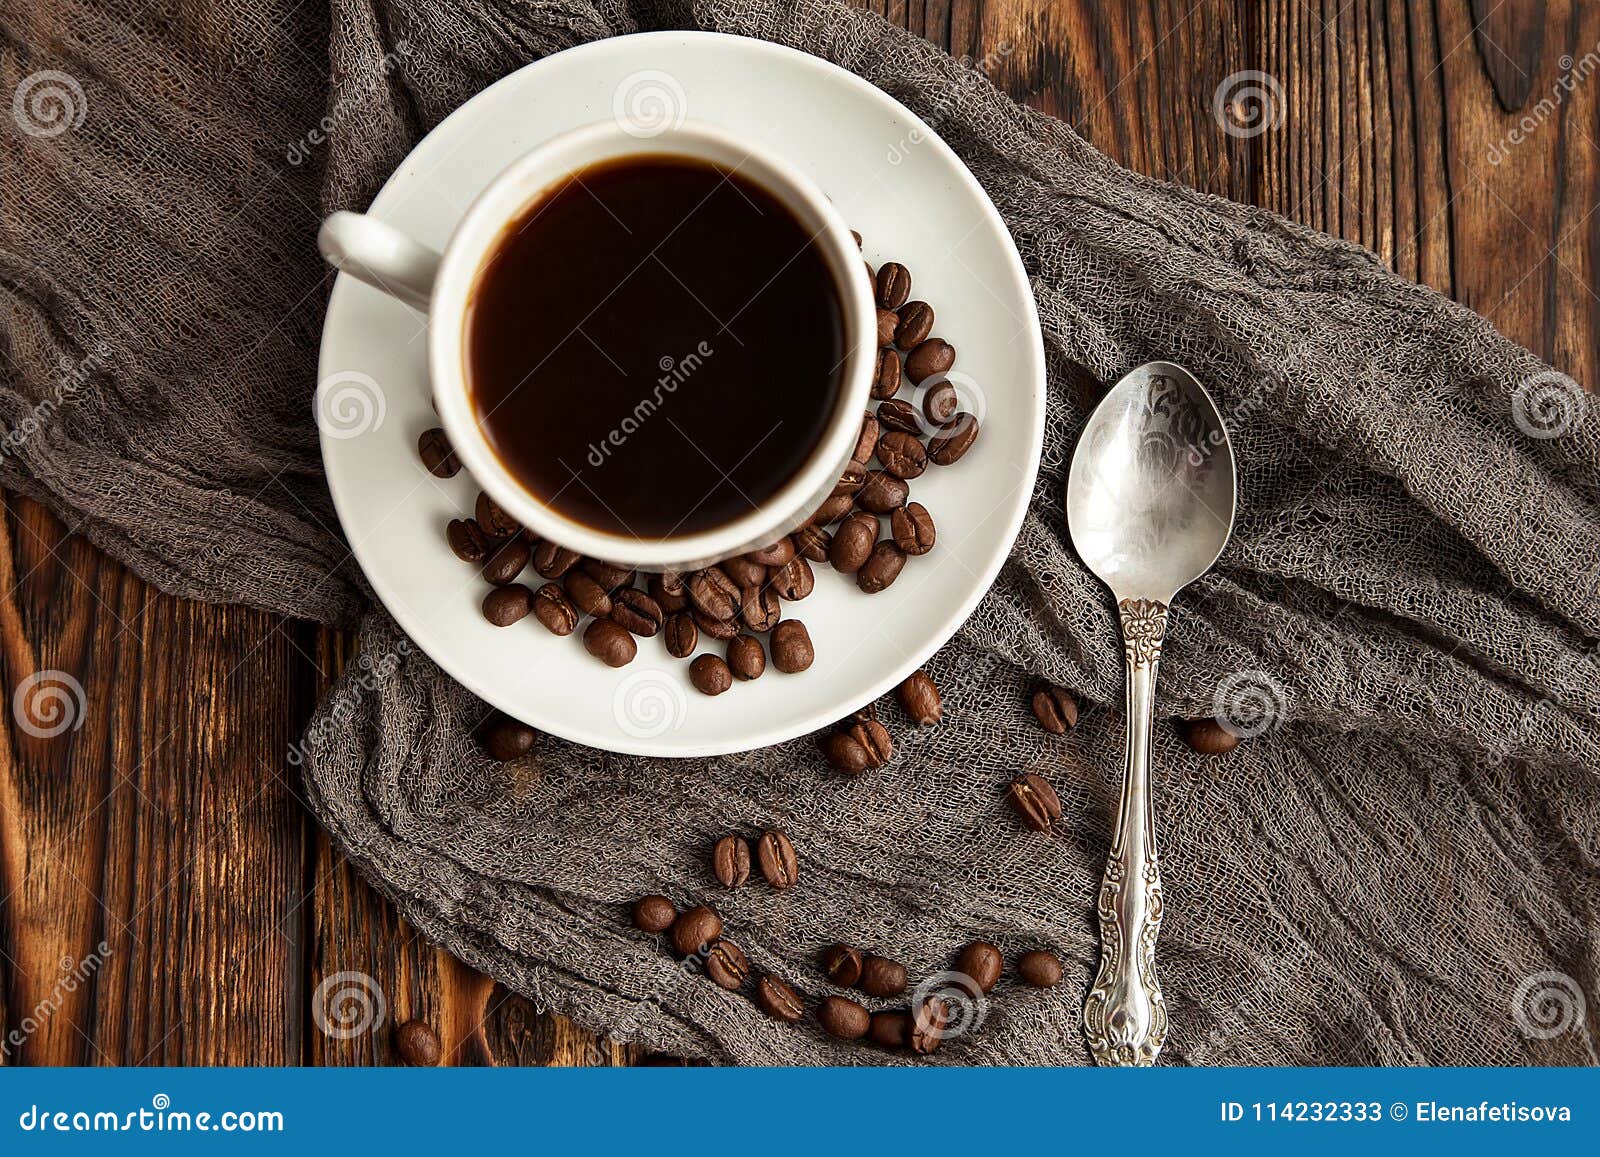 Coffee Express Triple In White Cup Next To Coffee Beans Scattered On Dark Vintage Wooden Table ...